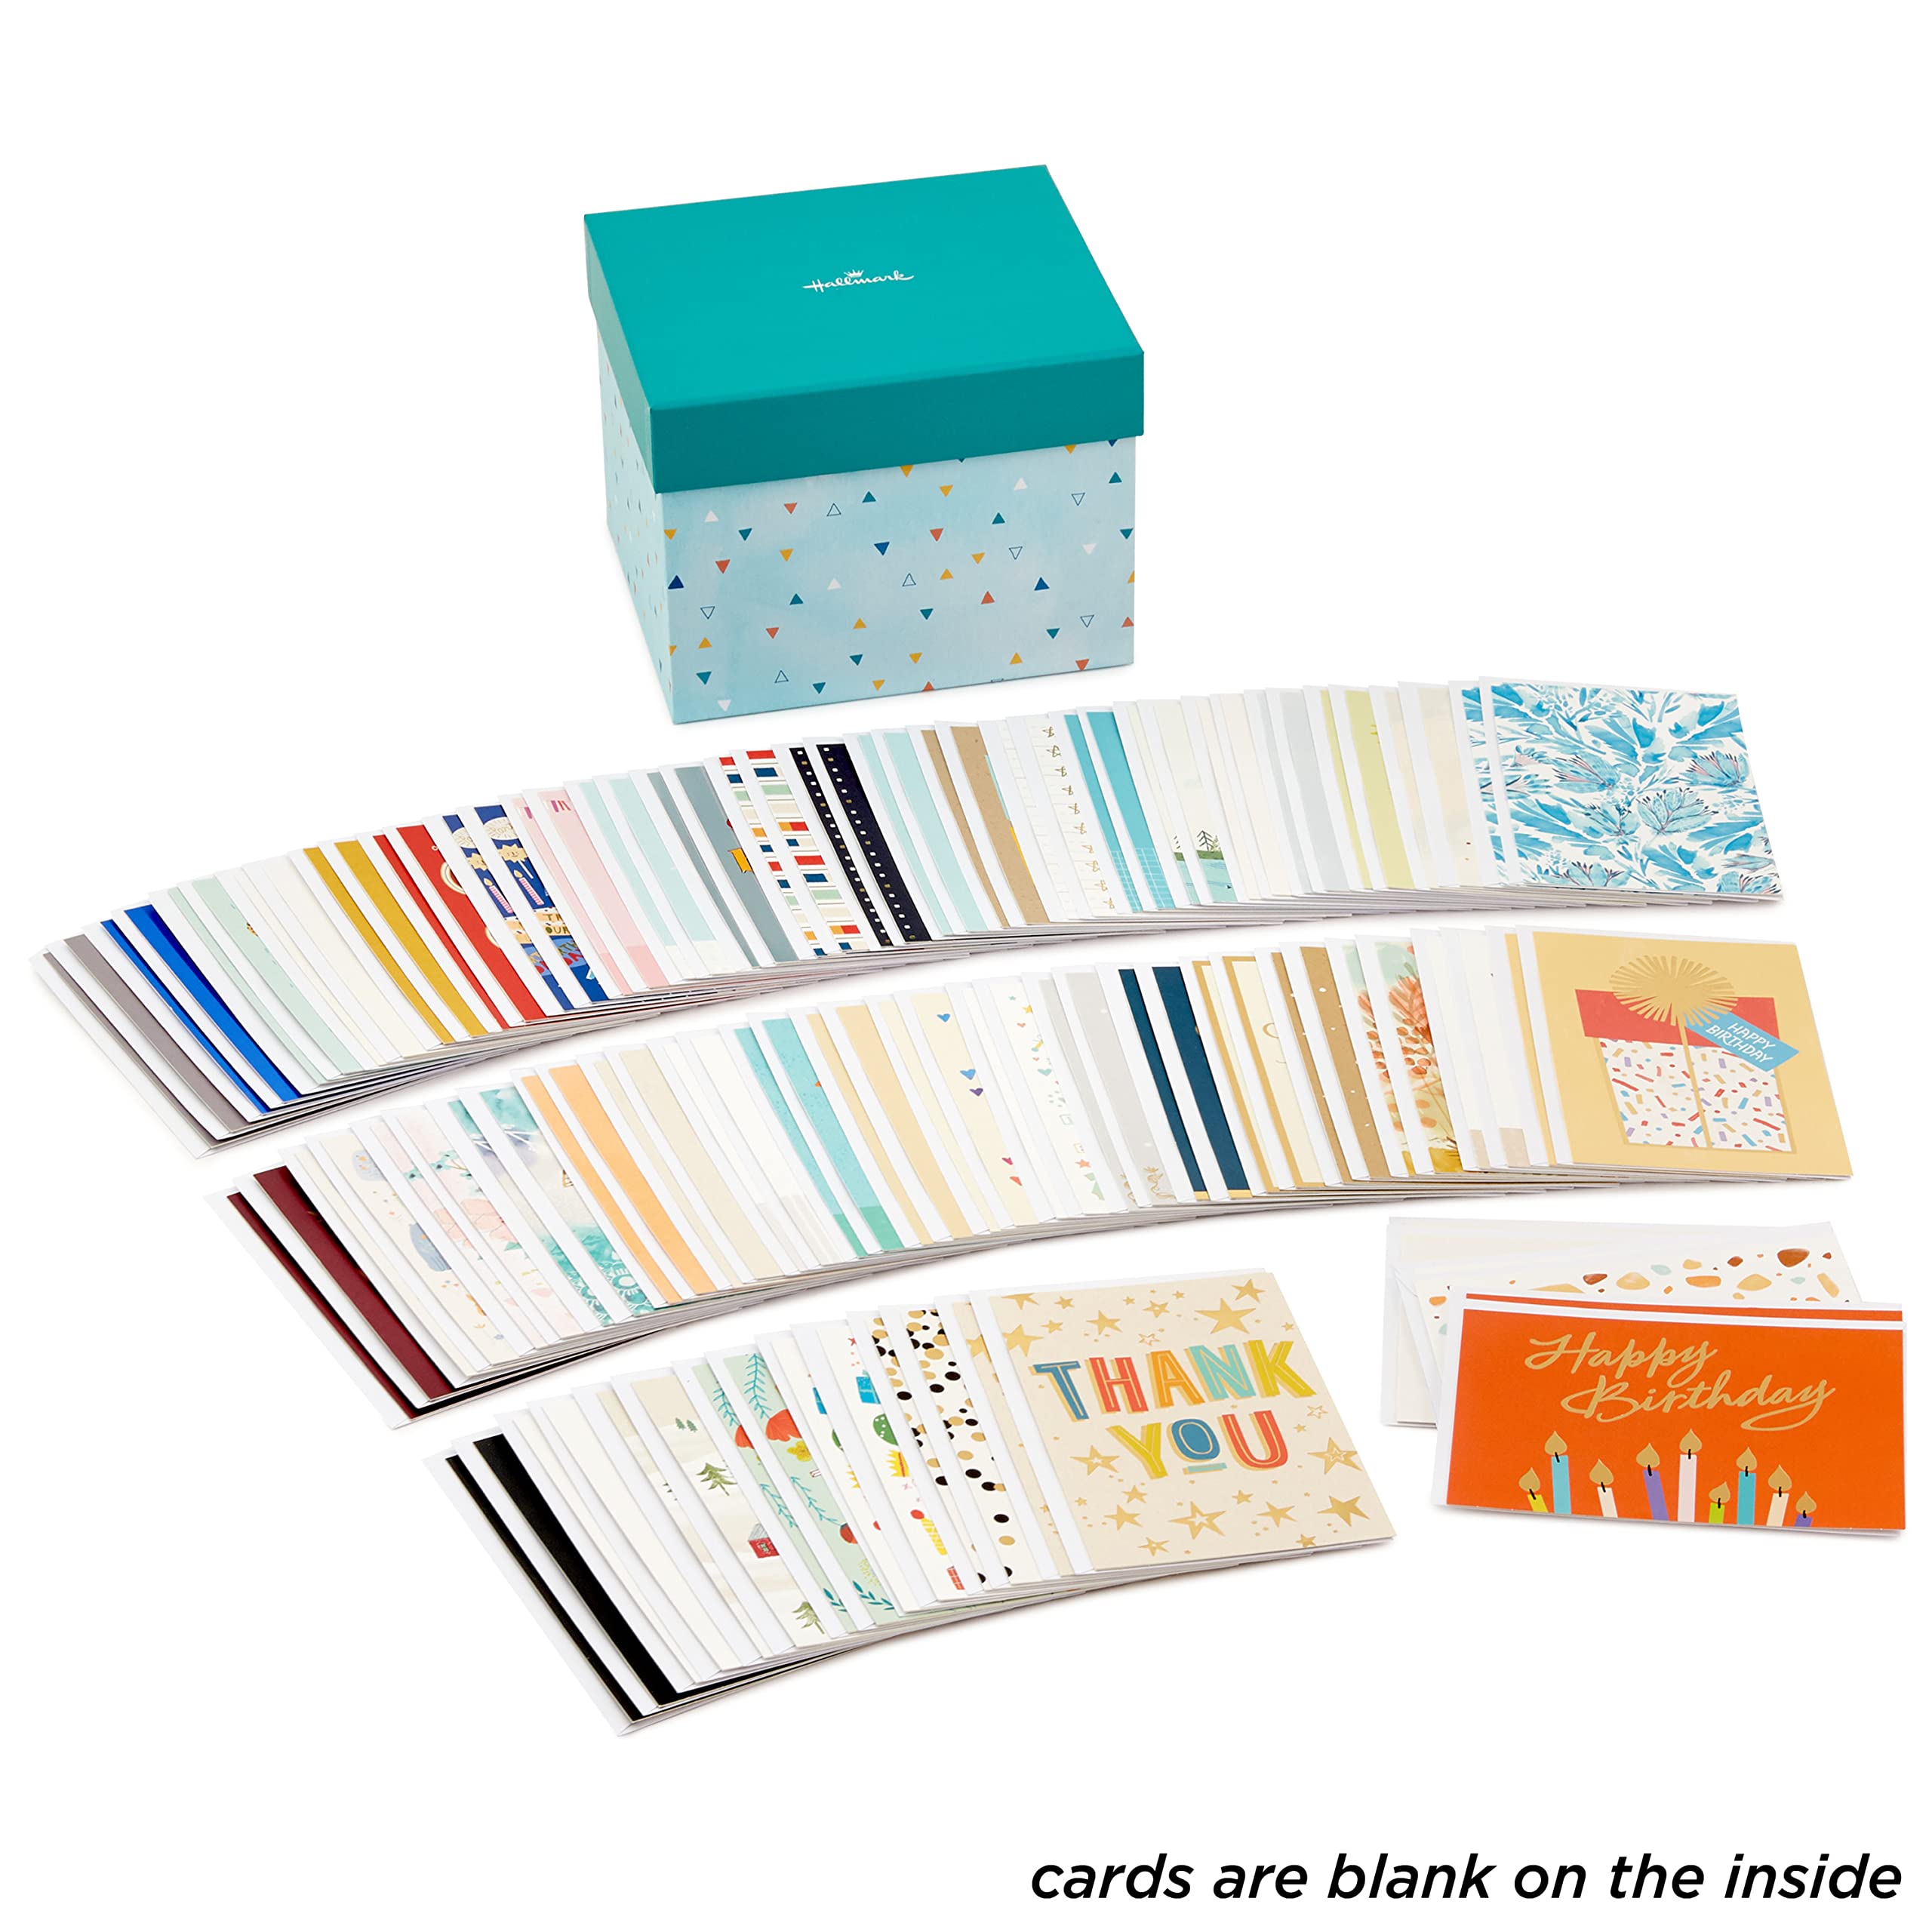 Hallmark All Occasion Boxed Set of Assorted Blank Greeting Cards with Card Organizer (Pack of 100)—Birthday, Thank You, Congratulations, Wedding, Baby, Thinking of You, Sympathy